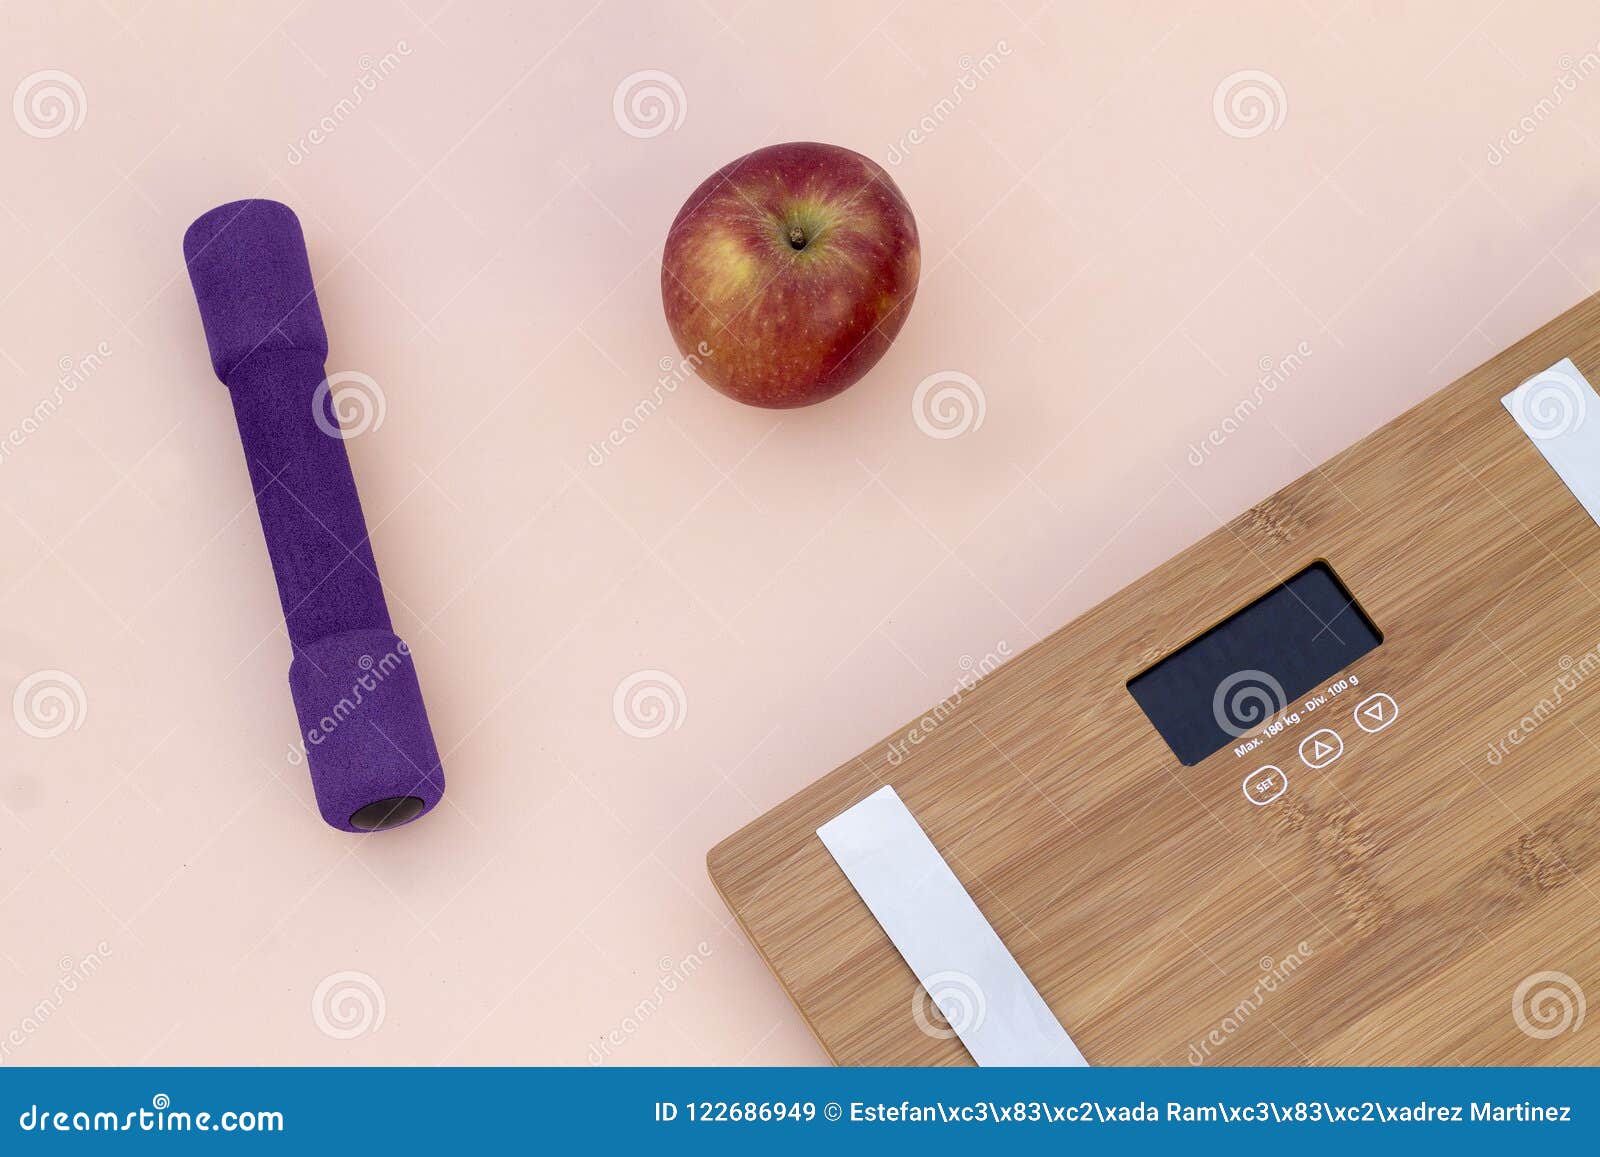 still life photography with a red apple, weight and a scale